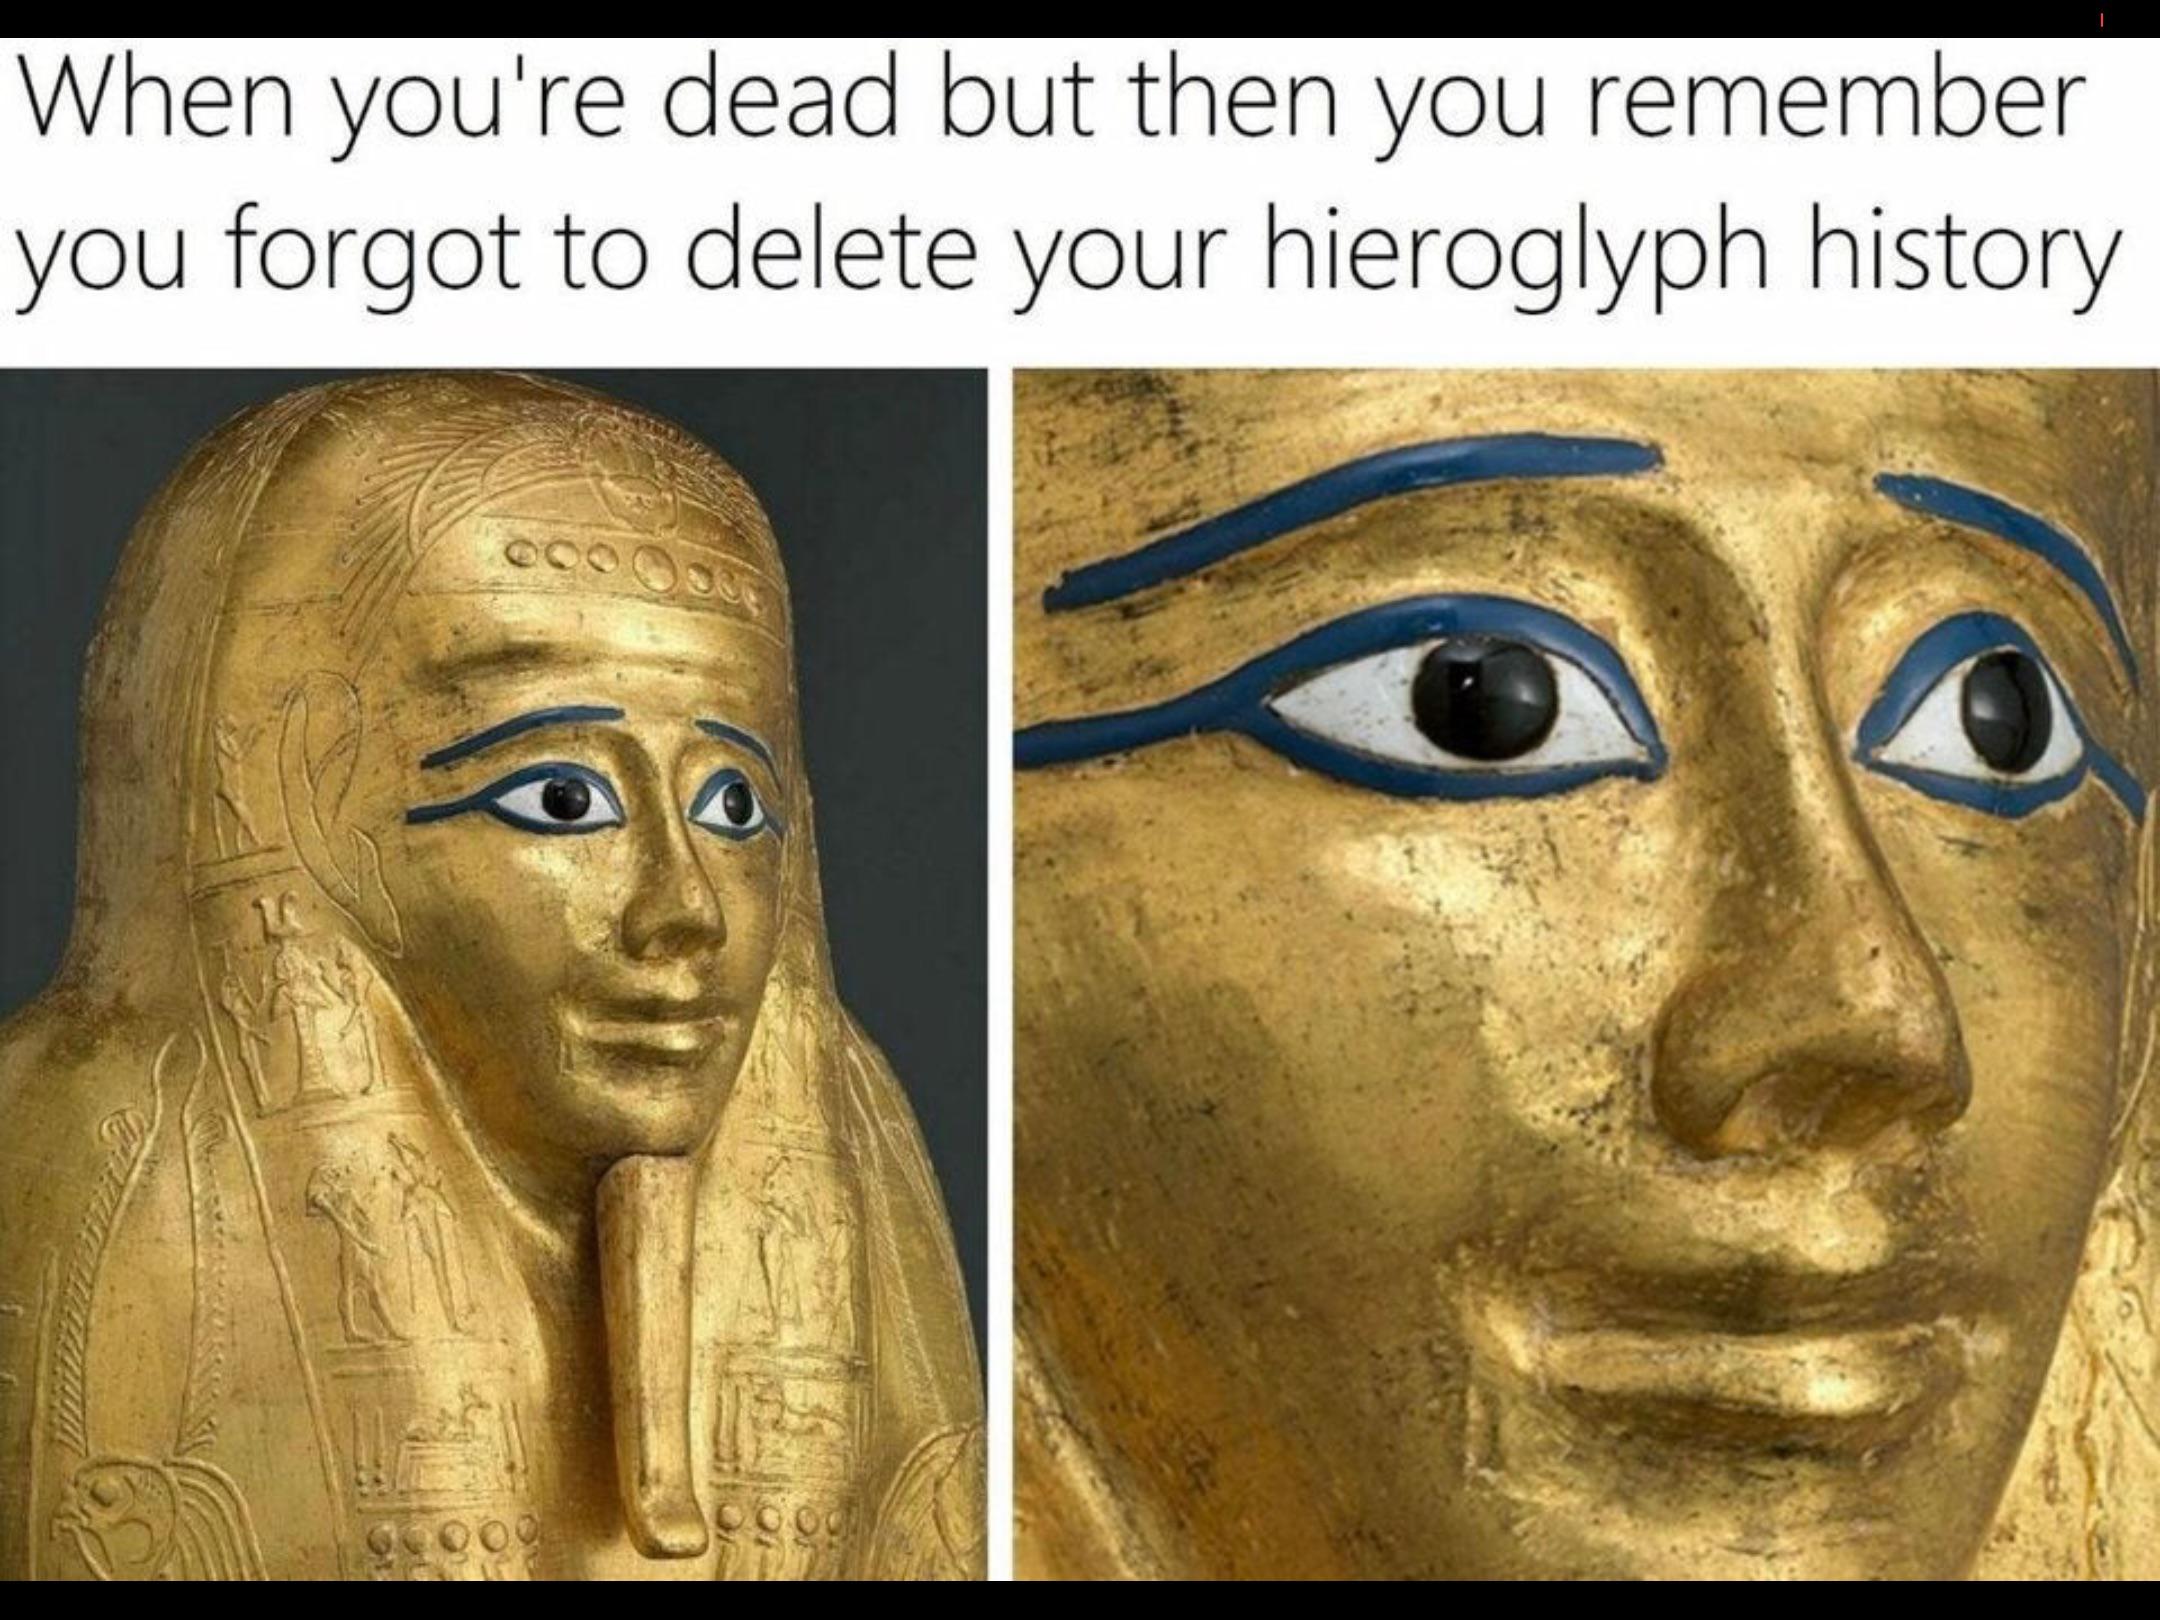 monday morning randomness - ancient egypt memes - When you're dead but then you remember you forgot to delete your hieroglyph history 200 000 900